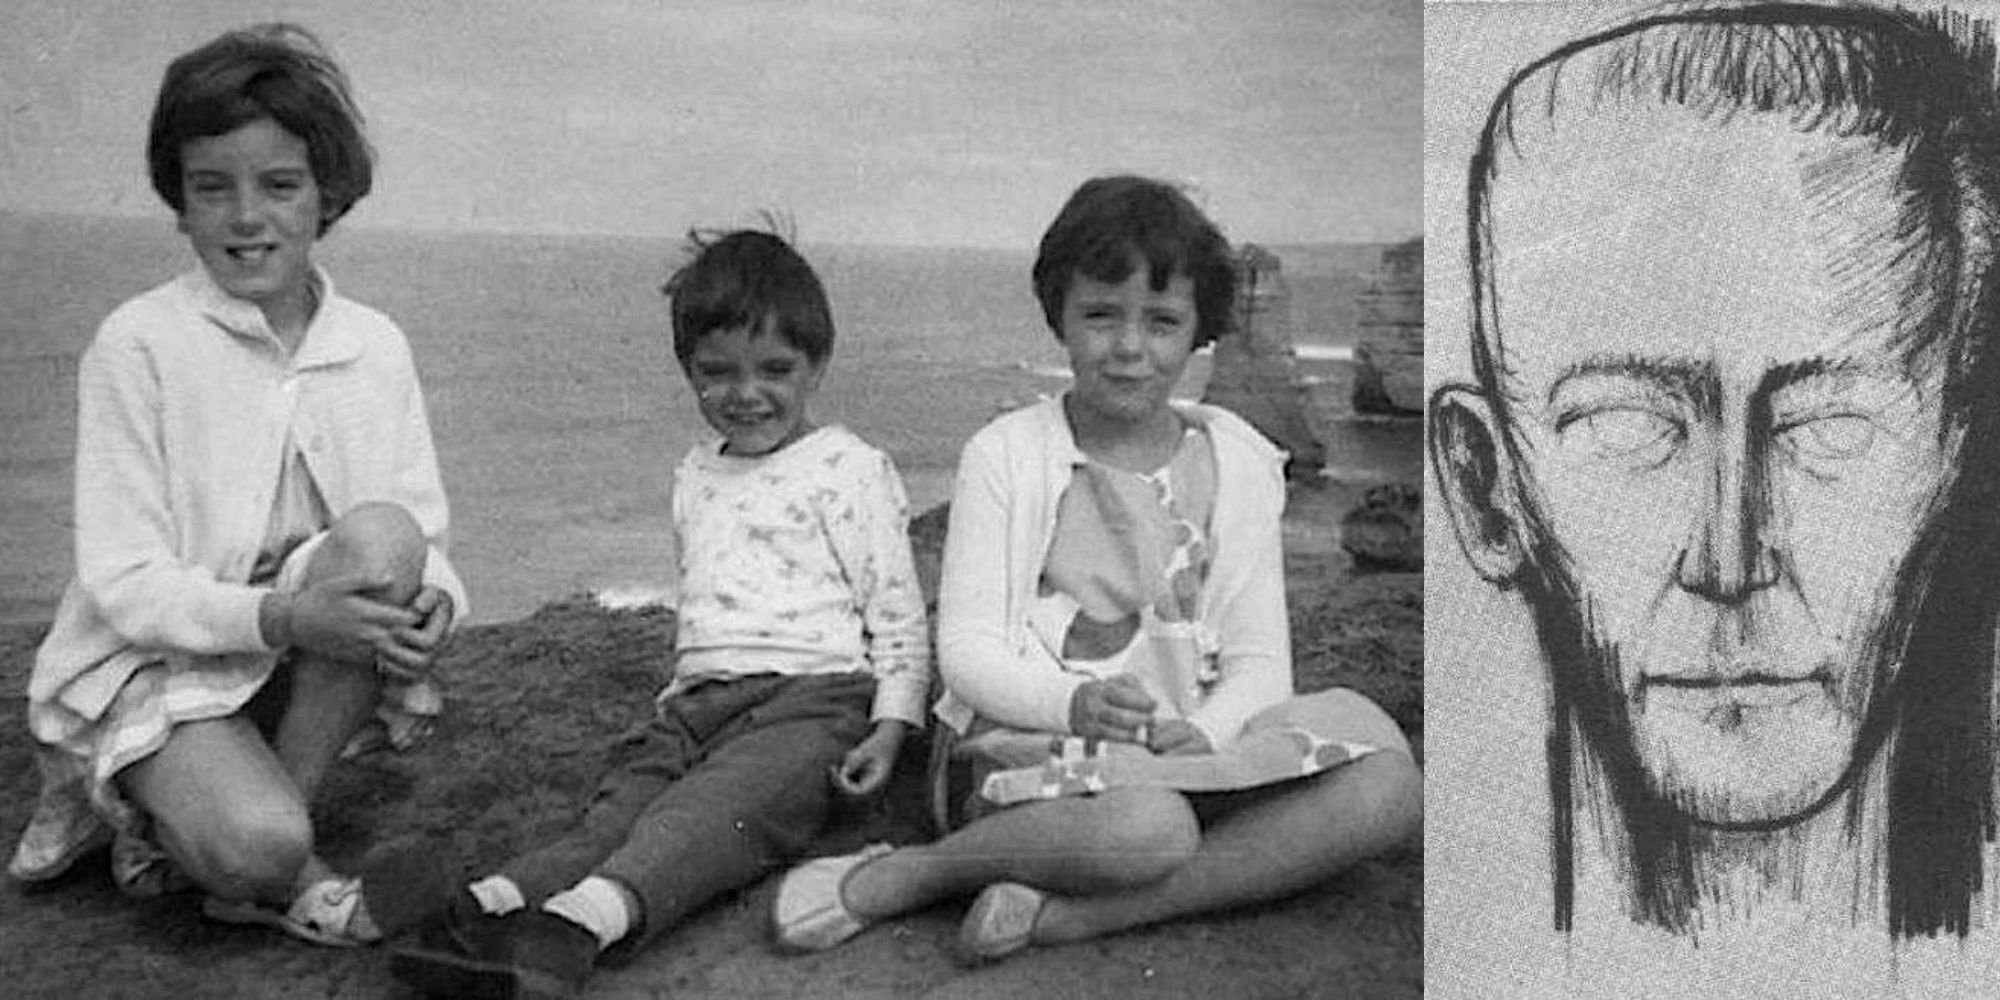 the Beaumont children missing from glenelg beach in 1966 unsolved true crime